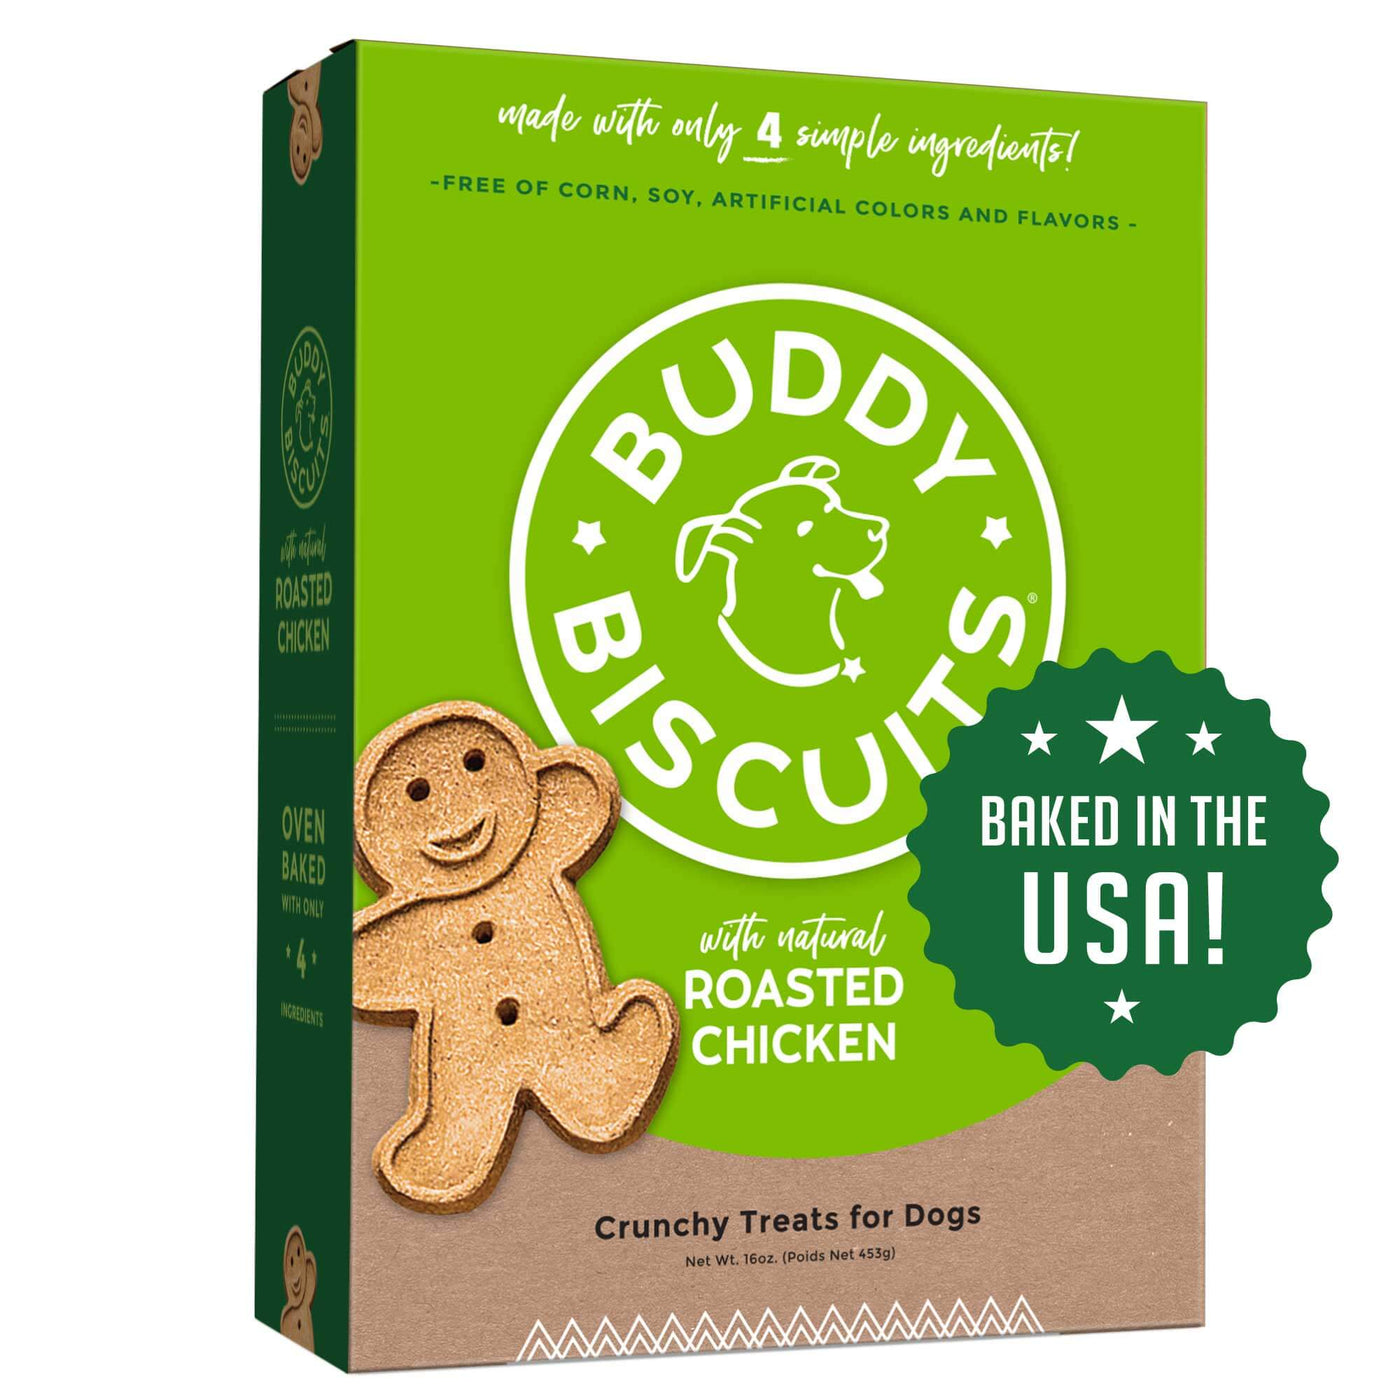 Roasted Chicken Healthy Whole Grain Oven Baked  Dog Treats - Buddy Biscuits